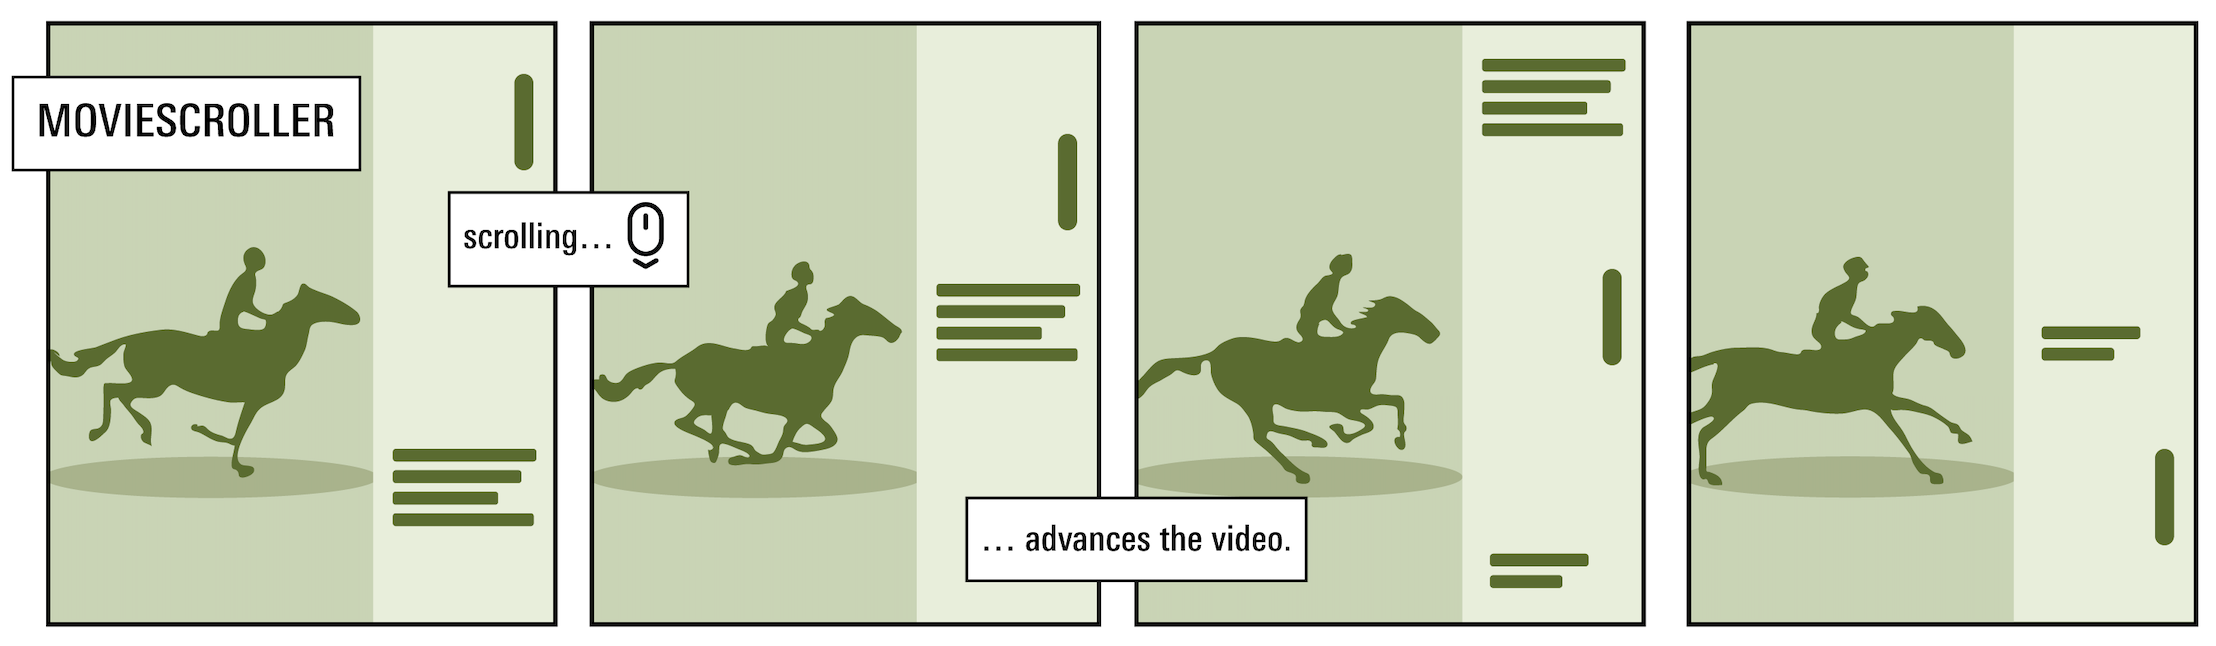 A four panel illustration of how moviescrollers work, with the text 'Scrolling... advances the video'